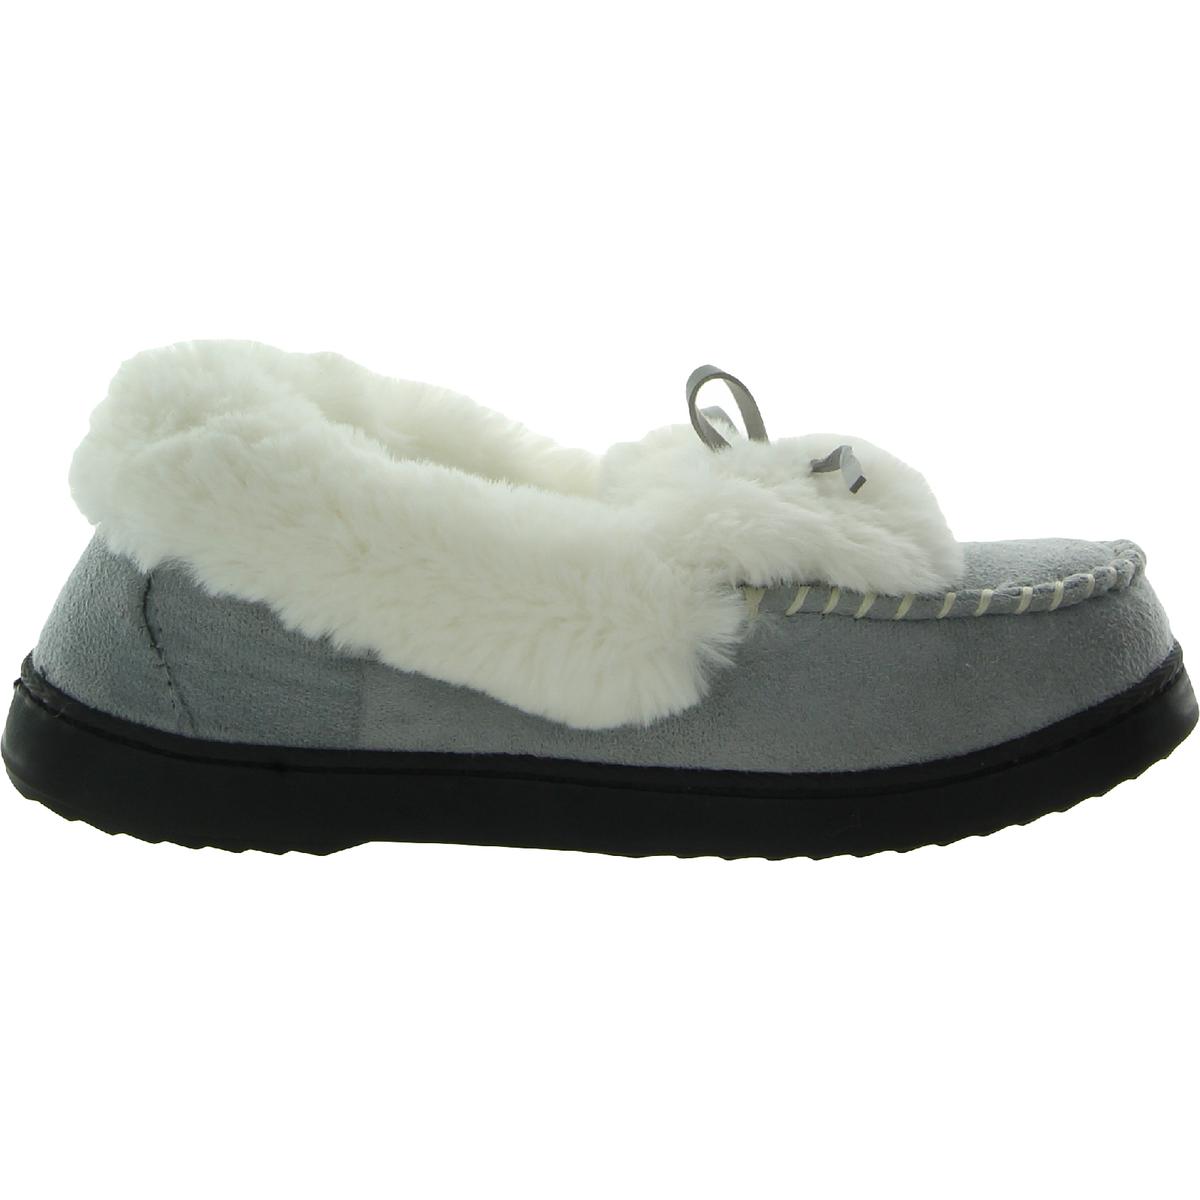 RockDove Bhfo Womens Faux Suede Moc Toe Loafer Slippers